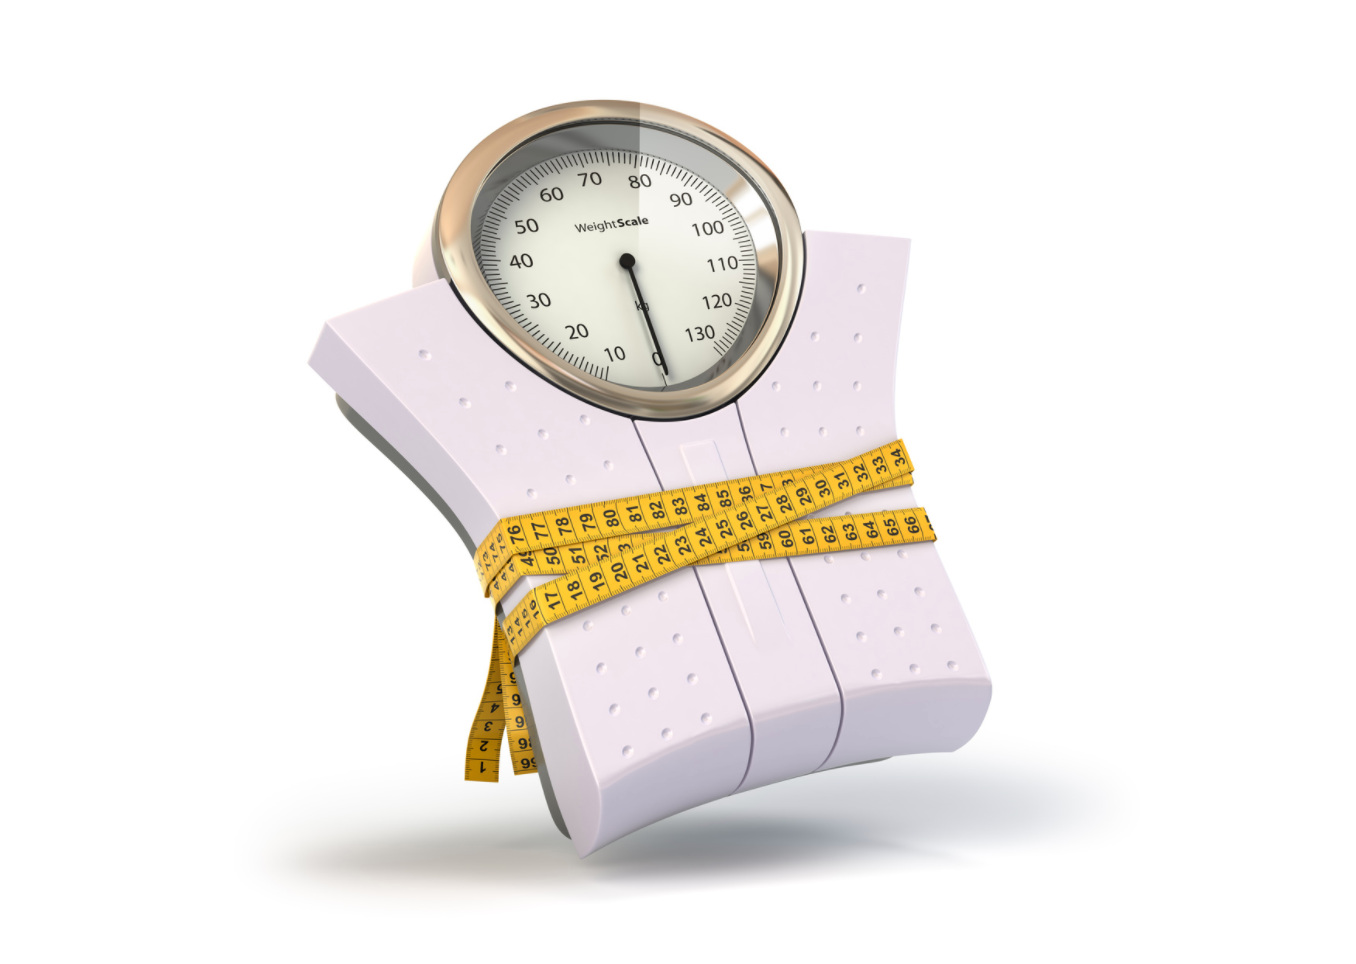 Lilly’s Tirzepatide Delivers Up to 22.5% Weight Loss in Adults Who Are Obese or Overweight